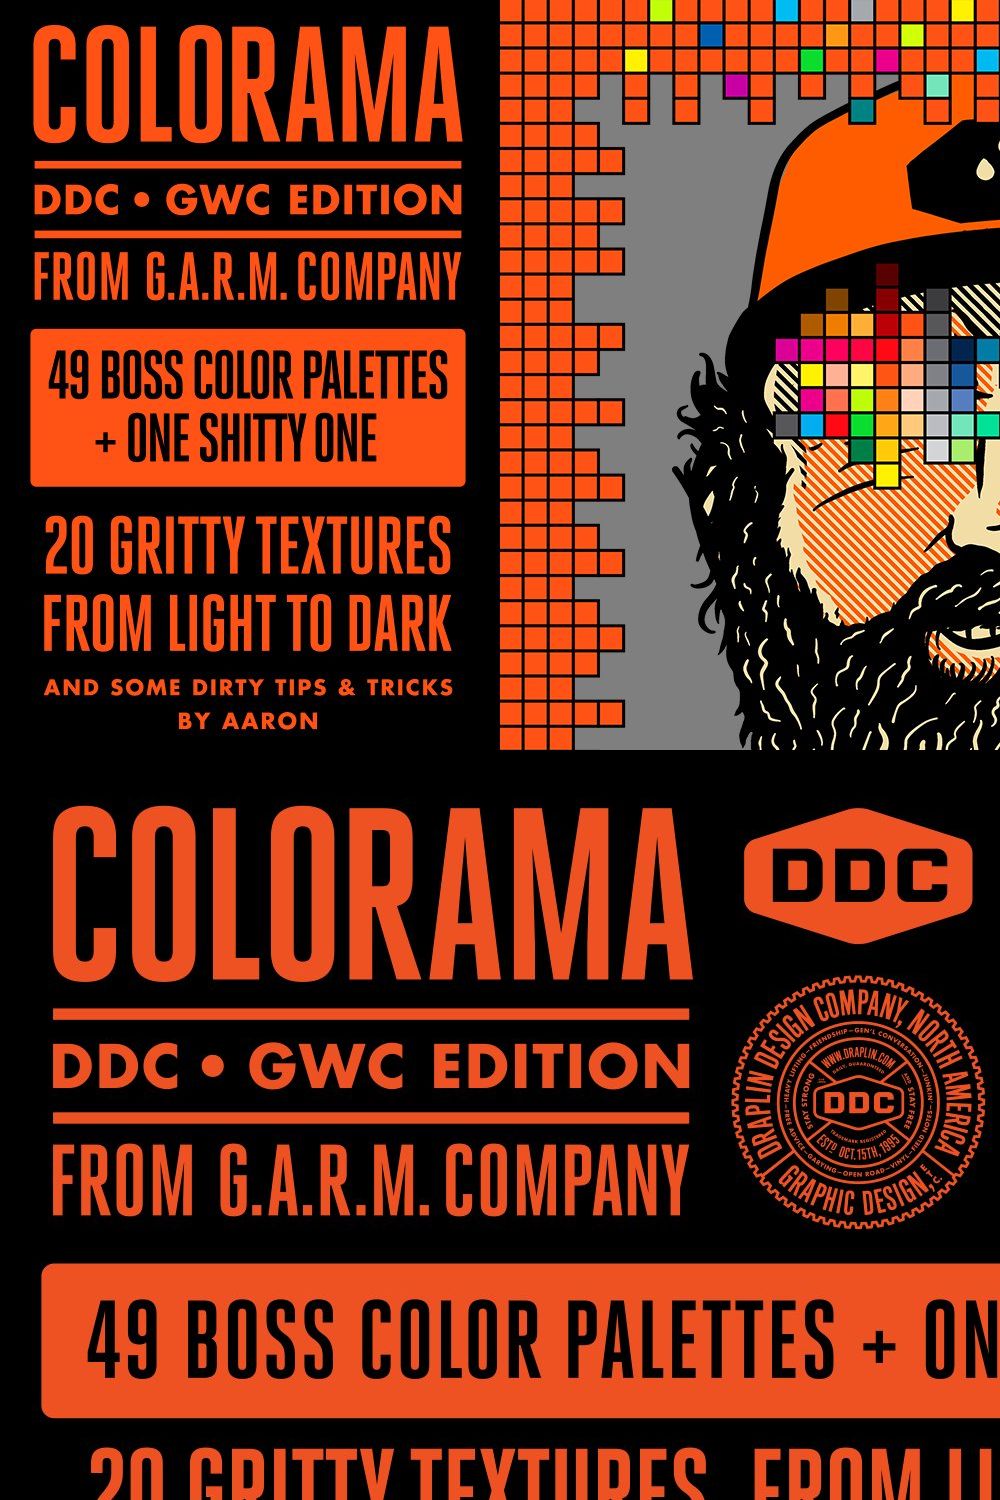 Colorama: DDC/GWC Edn. (Photoshop) pinterest preview image.